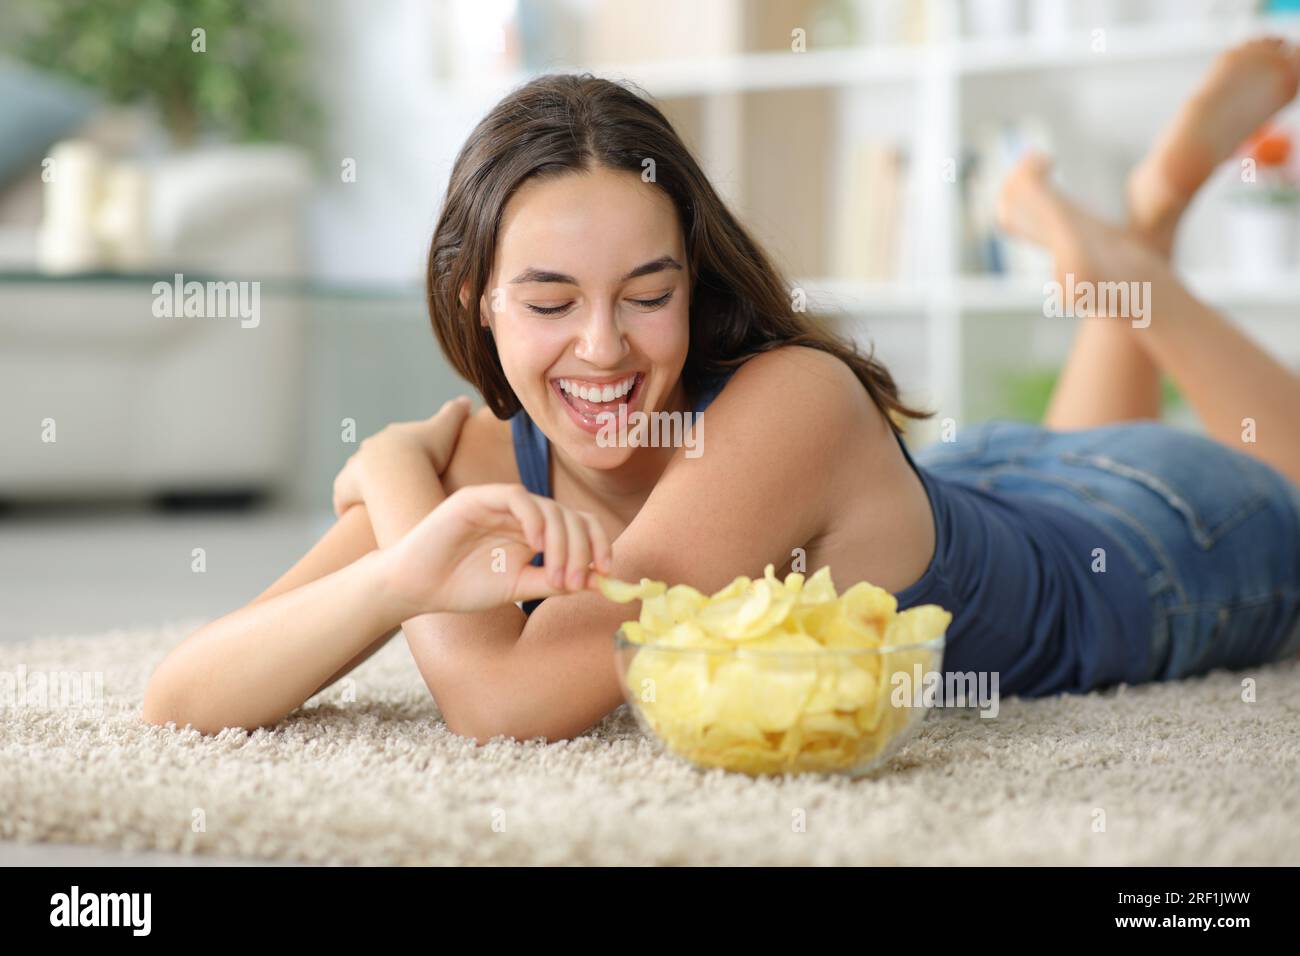 Happy woman laughing and eating potato chips on a carpet at home Stock Photo